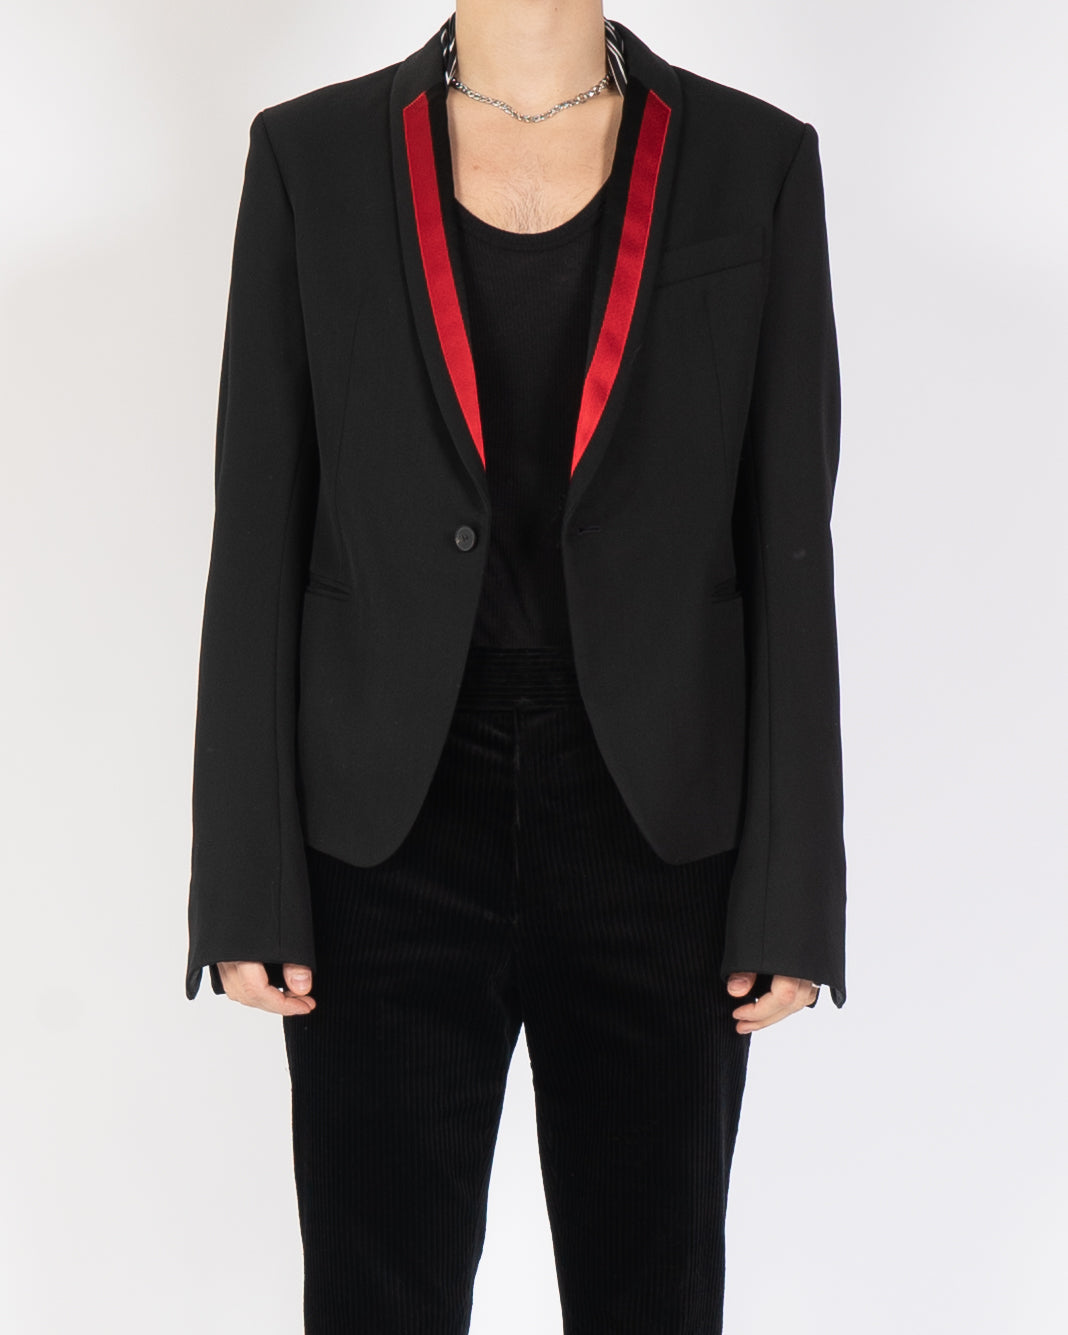 SS17 Cropped Blazer with Red Satin Lapel